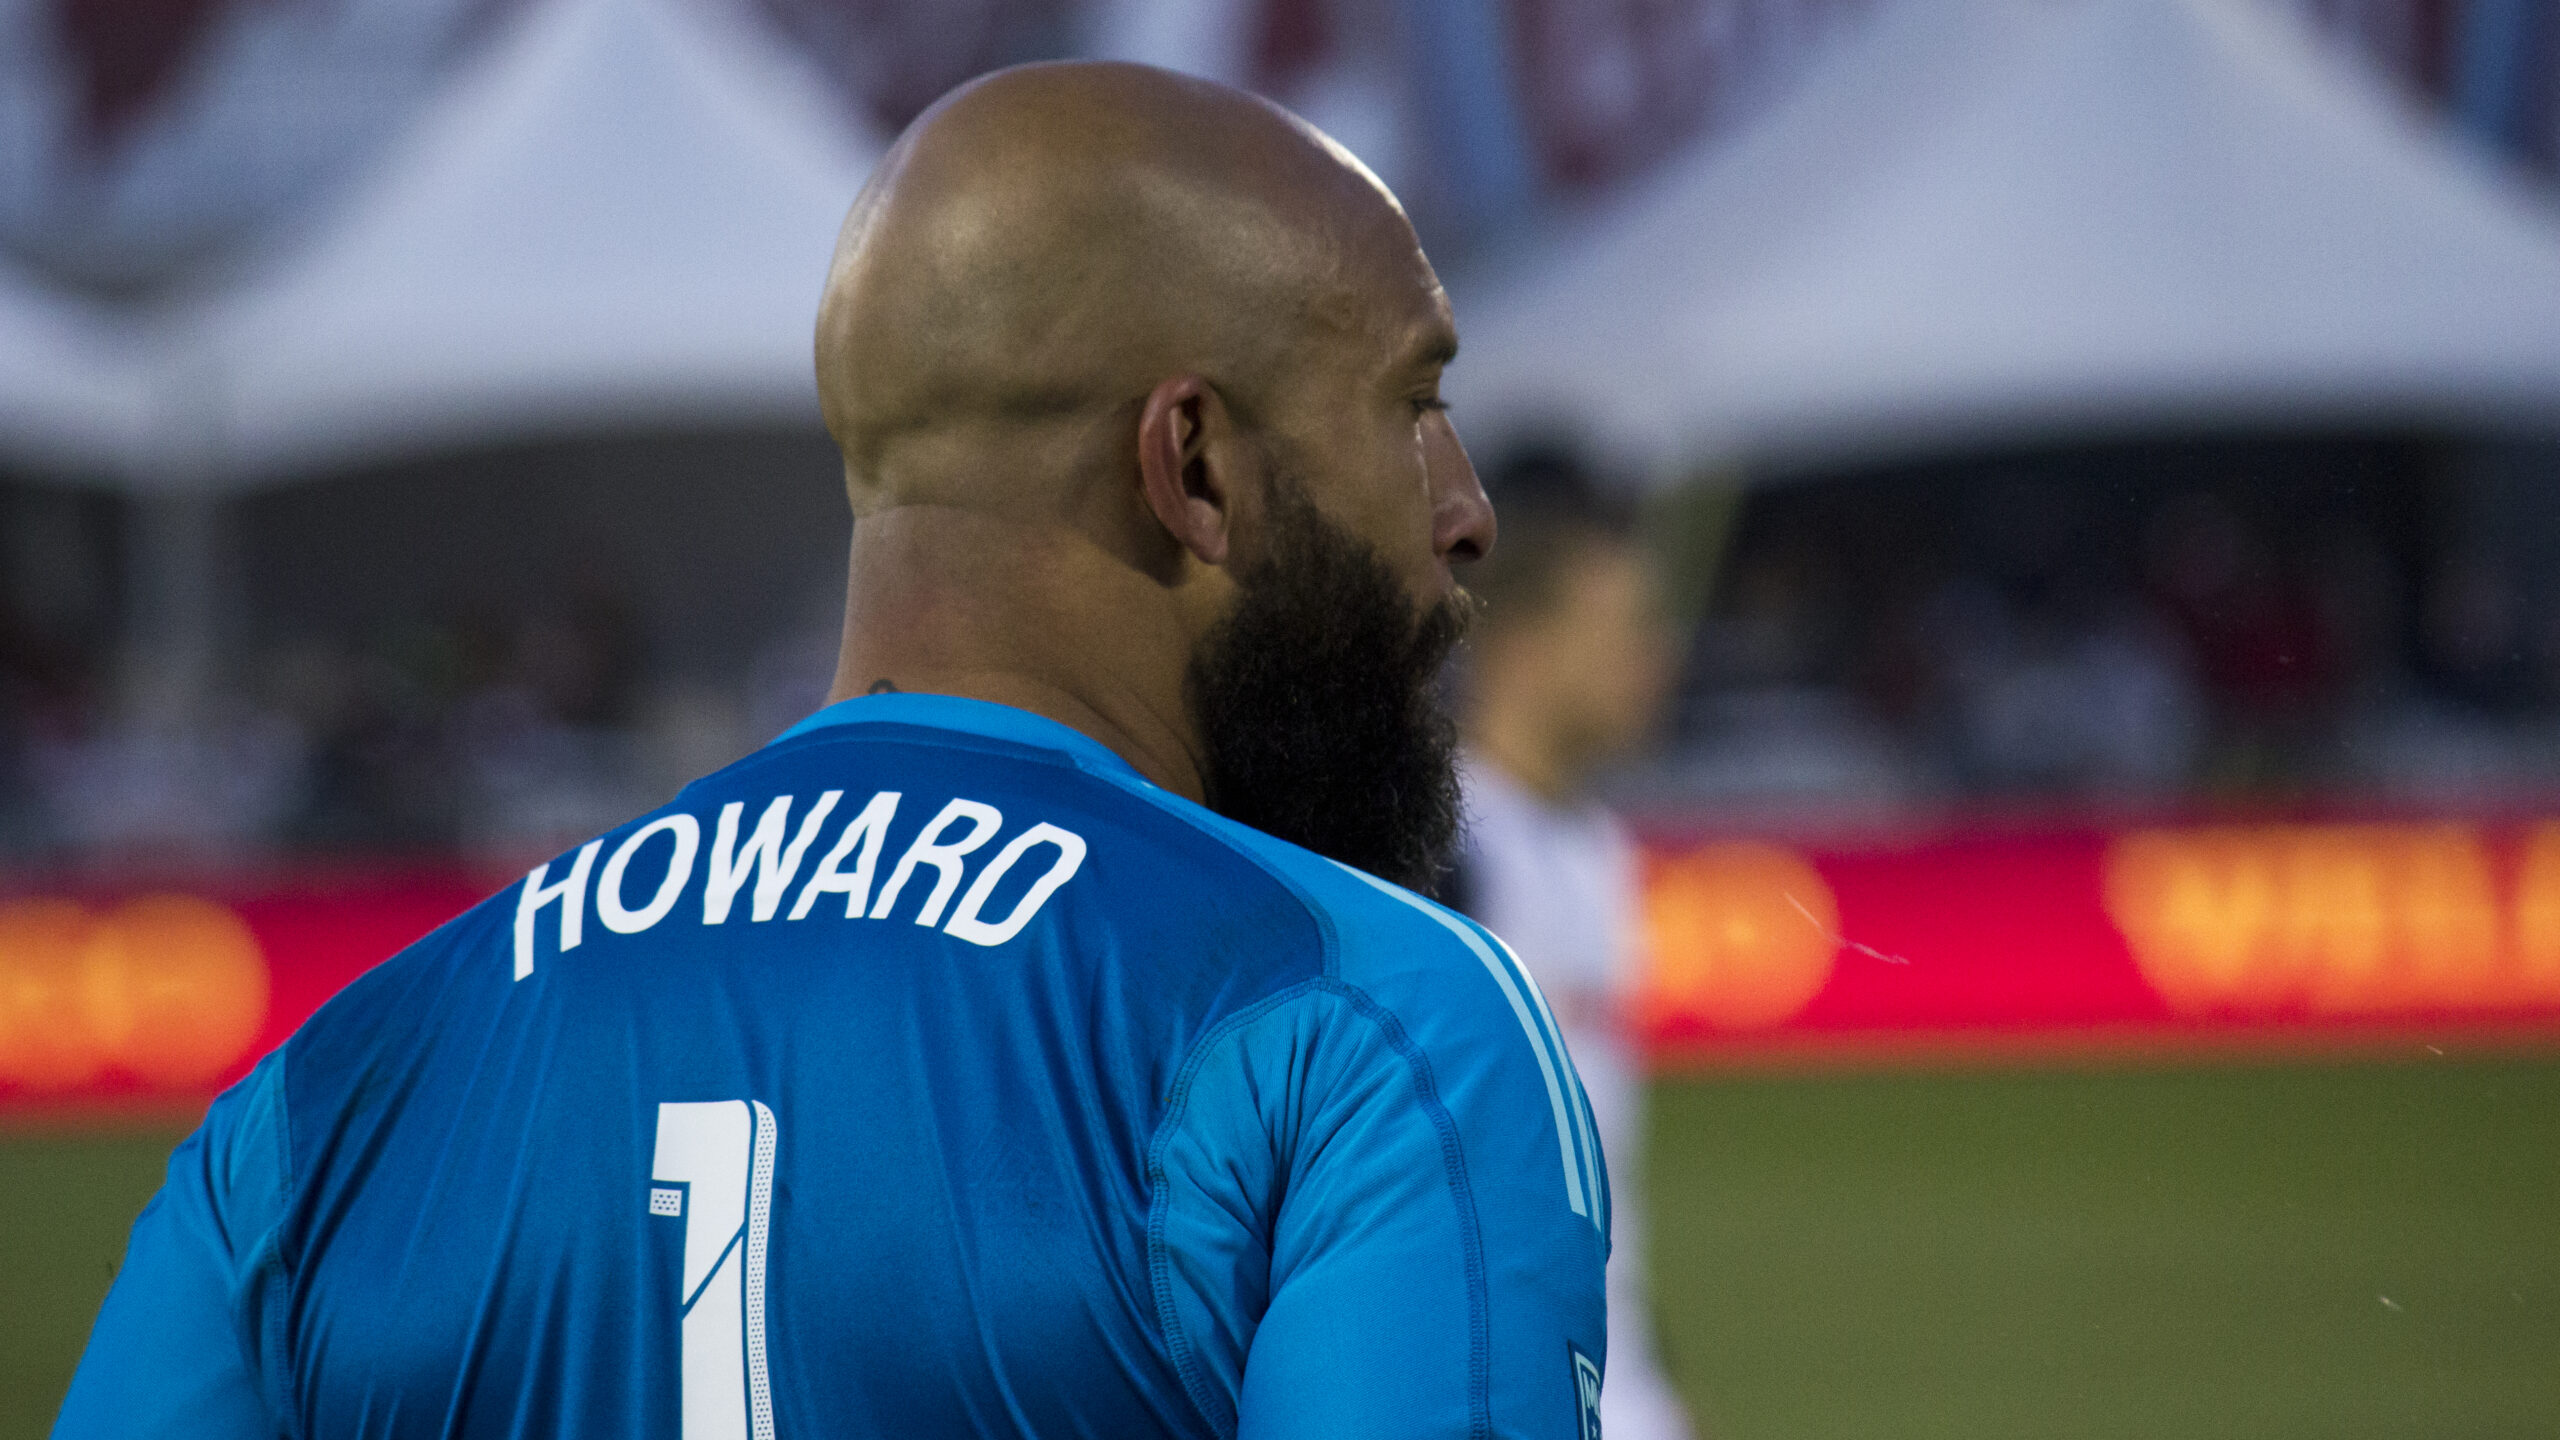 Tim Howard, goalkeeper for the Colorado Rapids. Photo by: Matthew McGuire